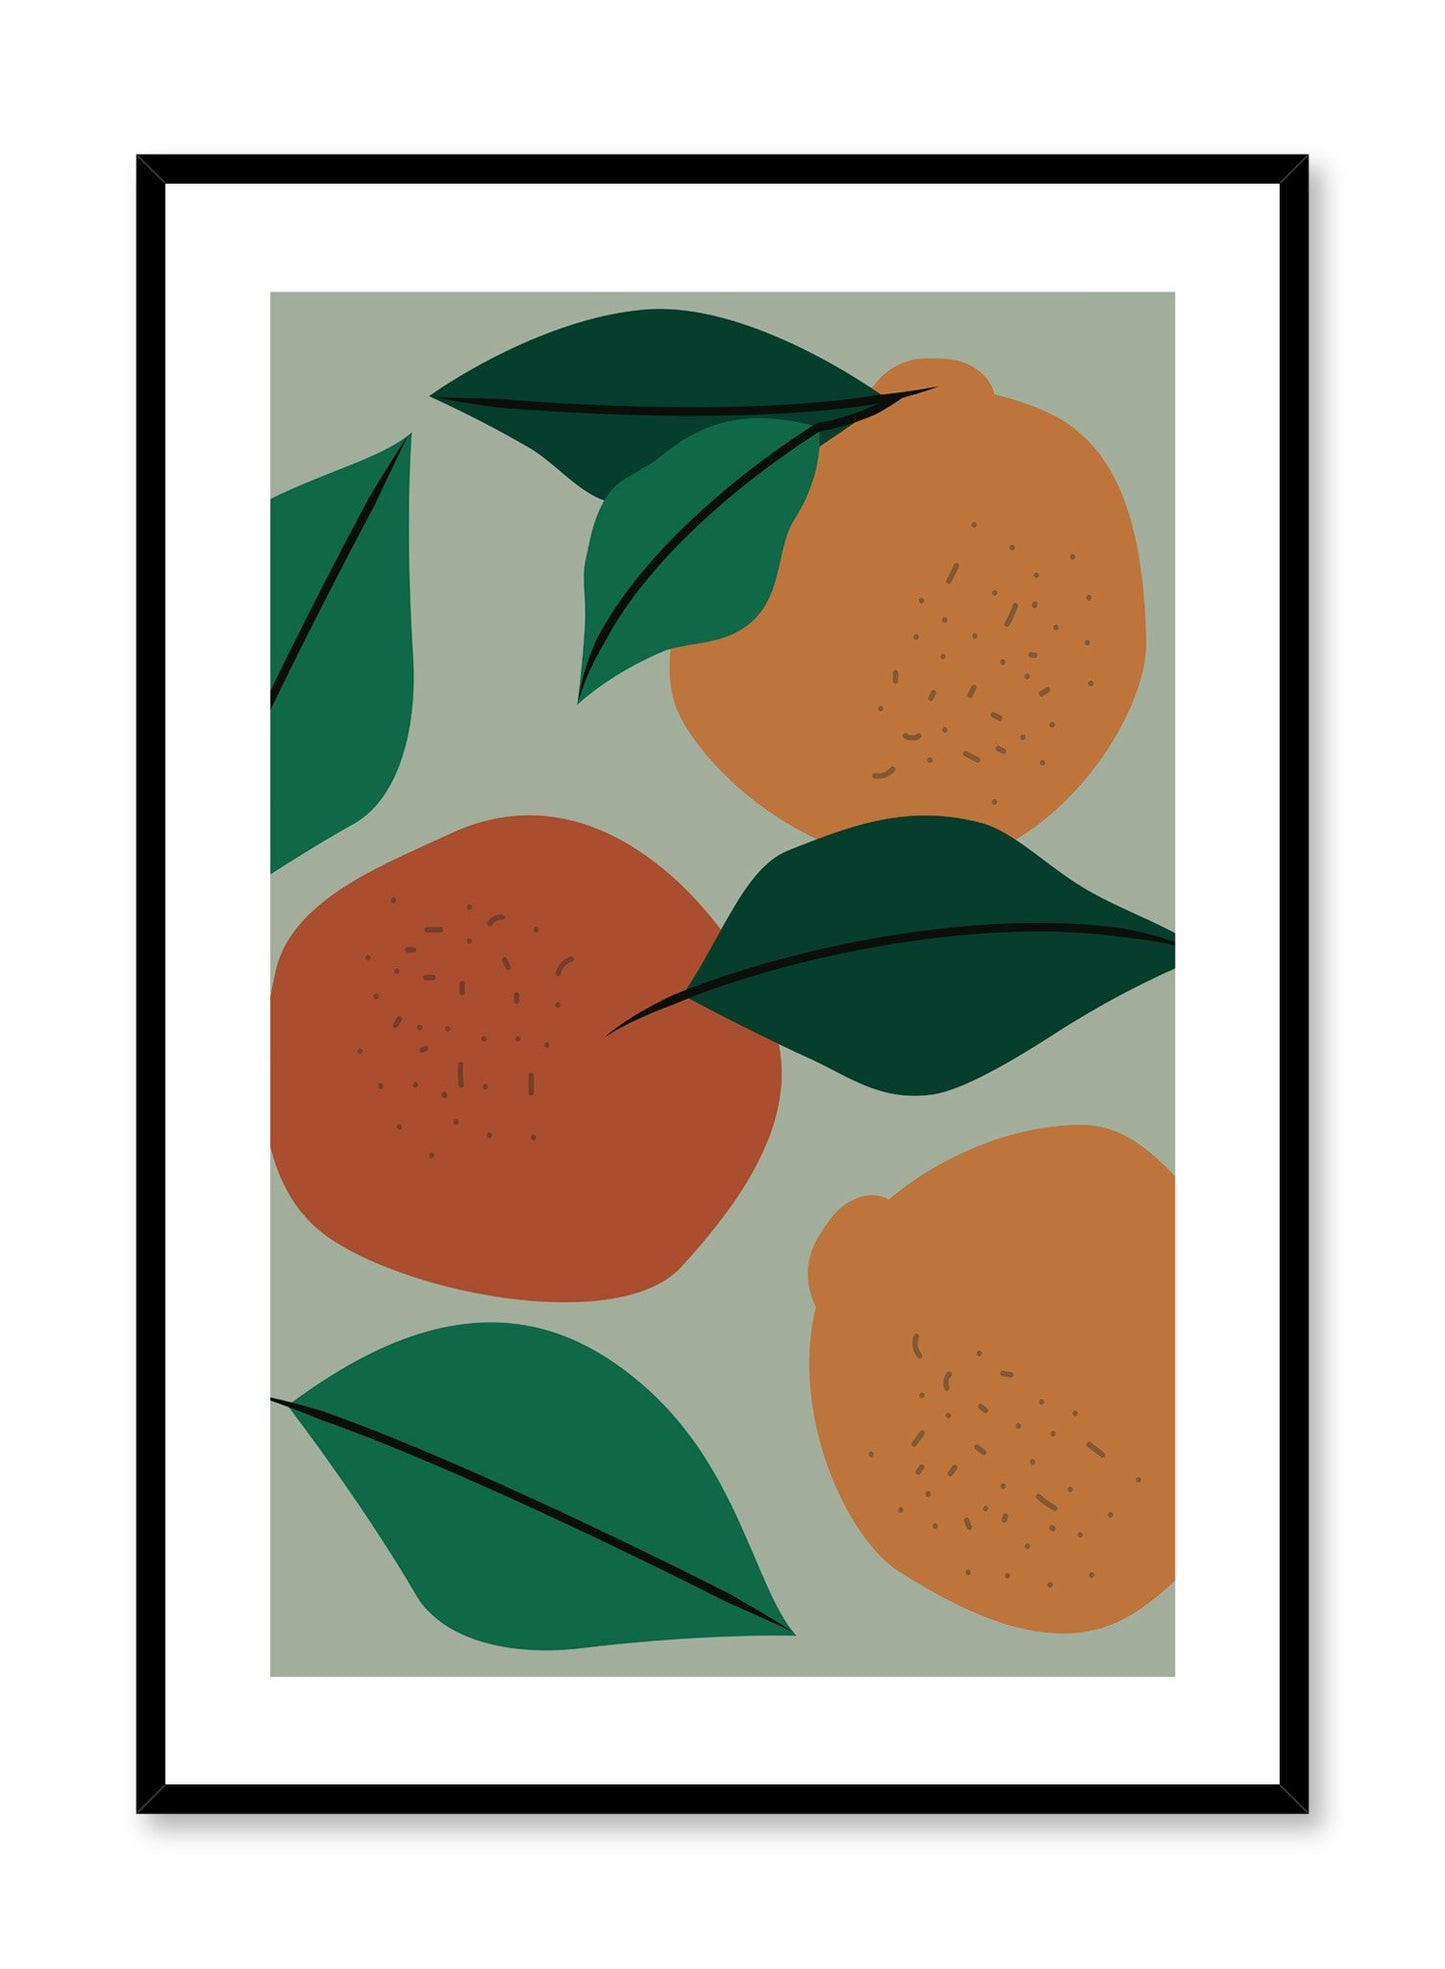 Orange You Glad? is a citrus illustration poster by Opposite Wall.